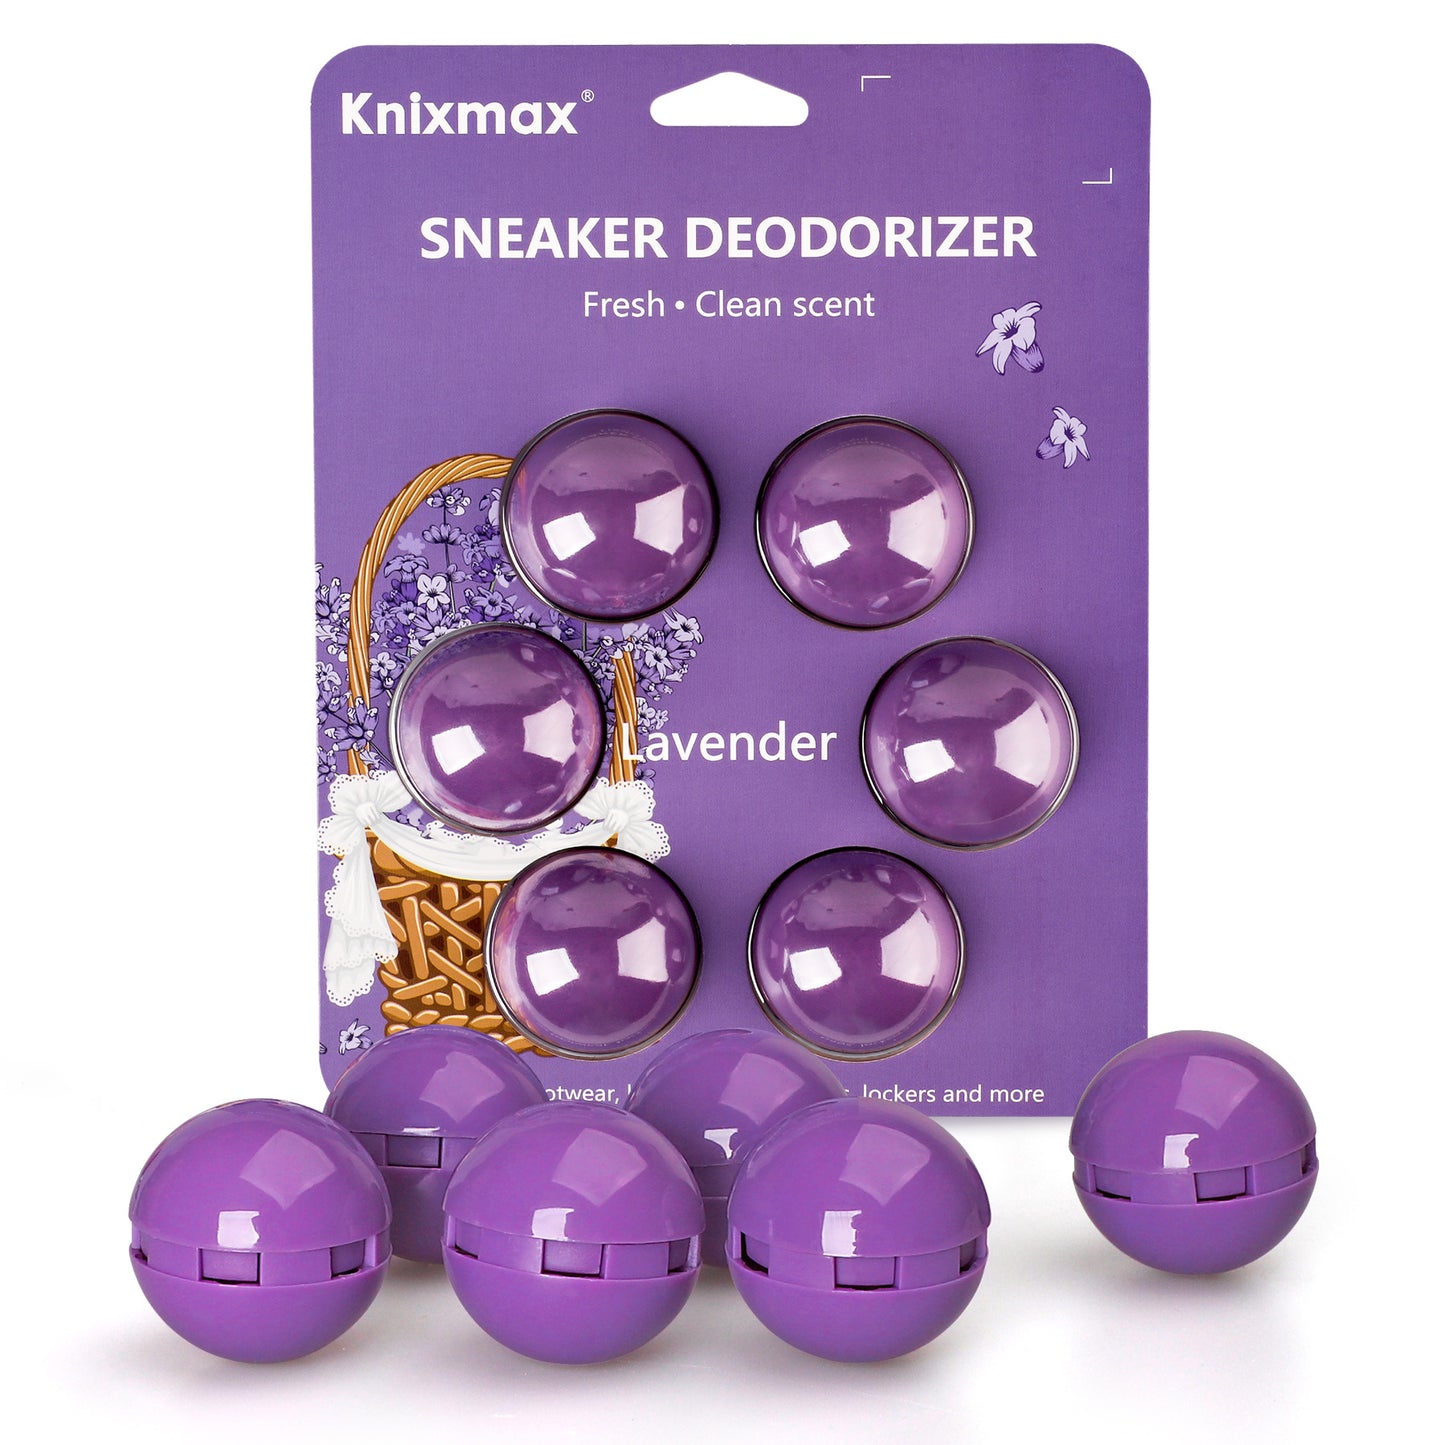 Knixmax Outdoor Aromatherapy Ball Shoe Odour Eliminator for Sneakers Kitchen Bedroom Bathroom Six Ball Pack/Lavender/Purple